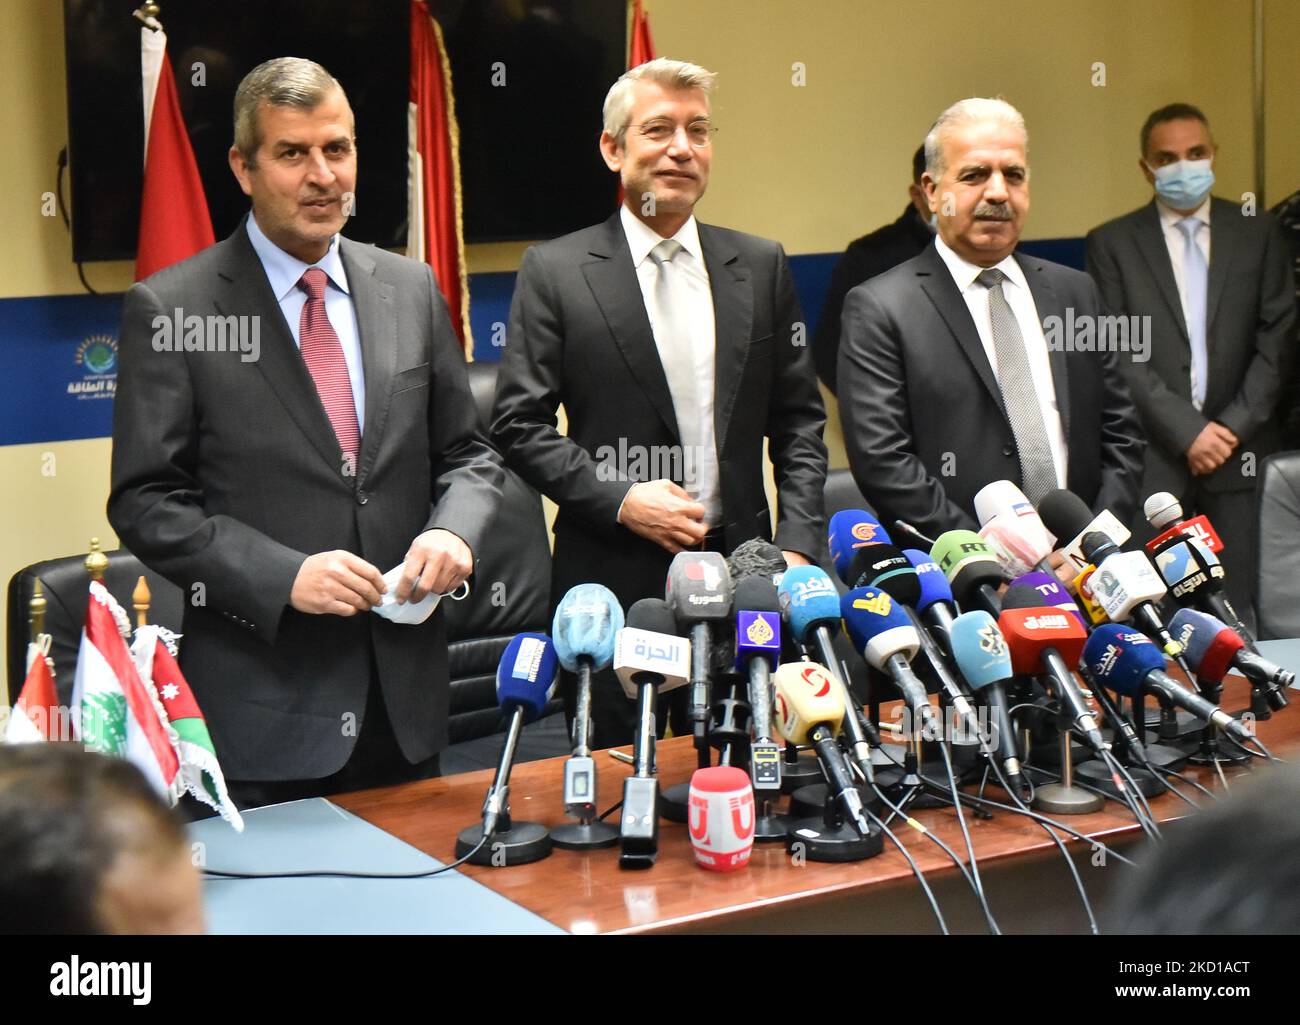 Lebanon's Energy Minister Walid Fayad (R), Syria's Electricity Minister Ghassan al-Zamil (2nd R) and Jordan's Minister of Energy and Mineral Resources Saleh Ali Hamed al-Kharabsheh (L) sit during the signing of a deal that will supply Lebanon with electricity, in Beirut on January 26, 2022. (Photo by Fadel Itani/NurPhoto) Stock Photo